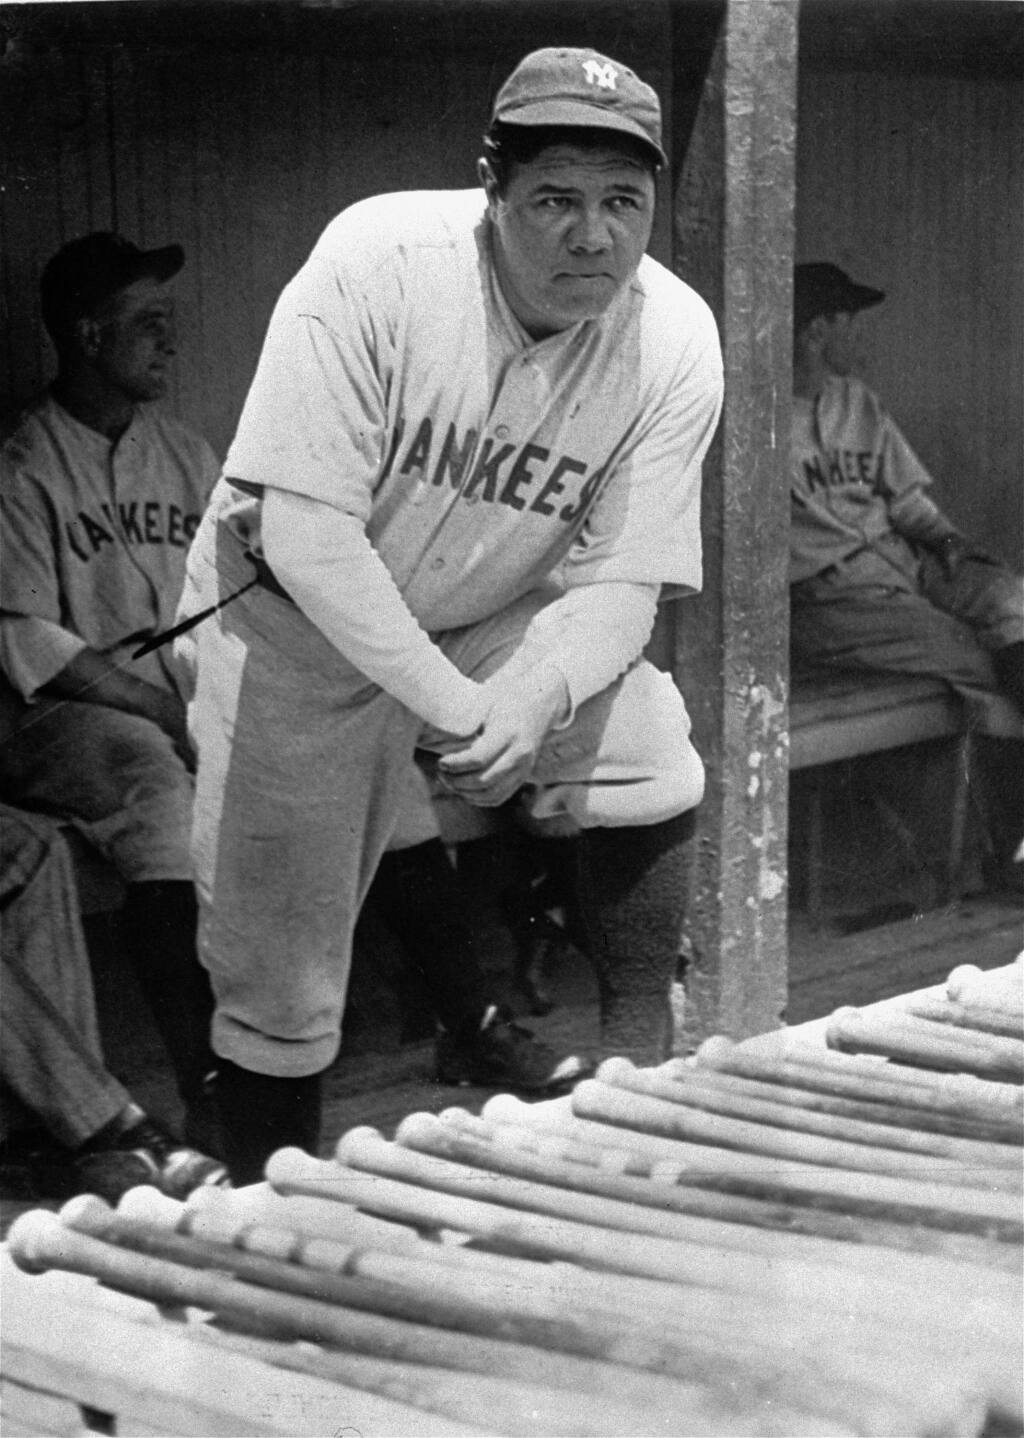 Babe Ruth died leaving behind a career that touched all the bases